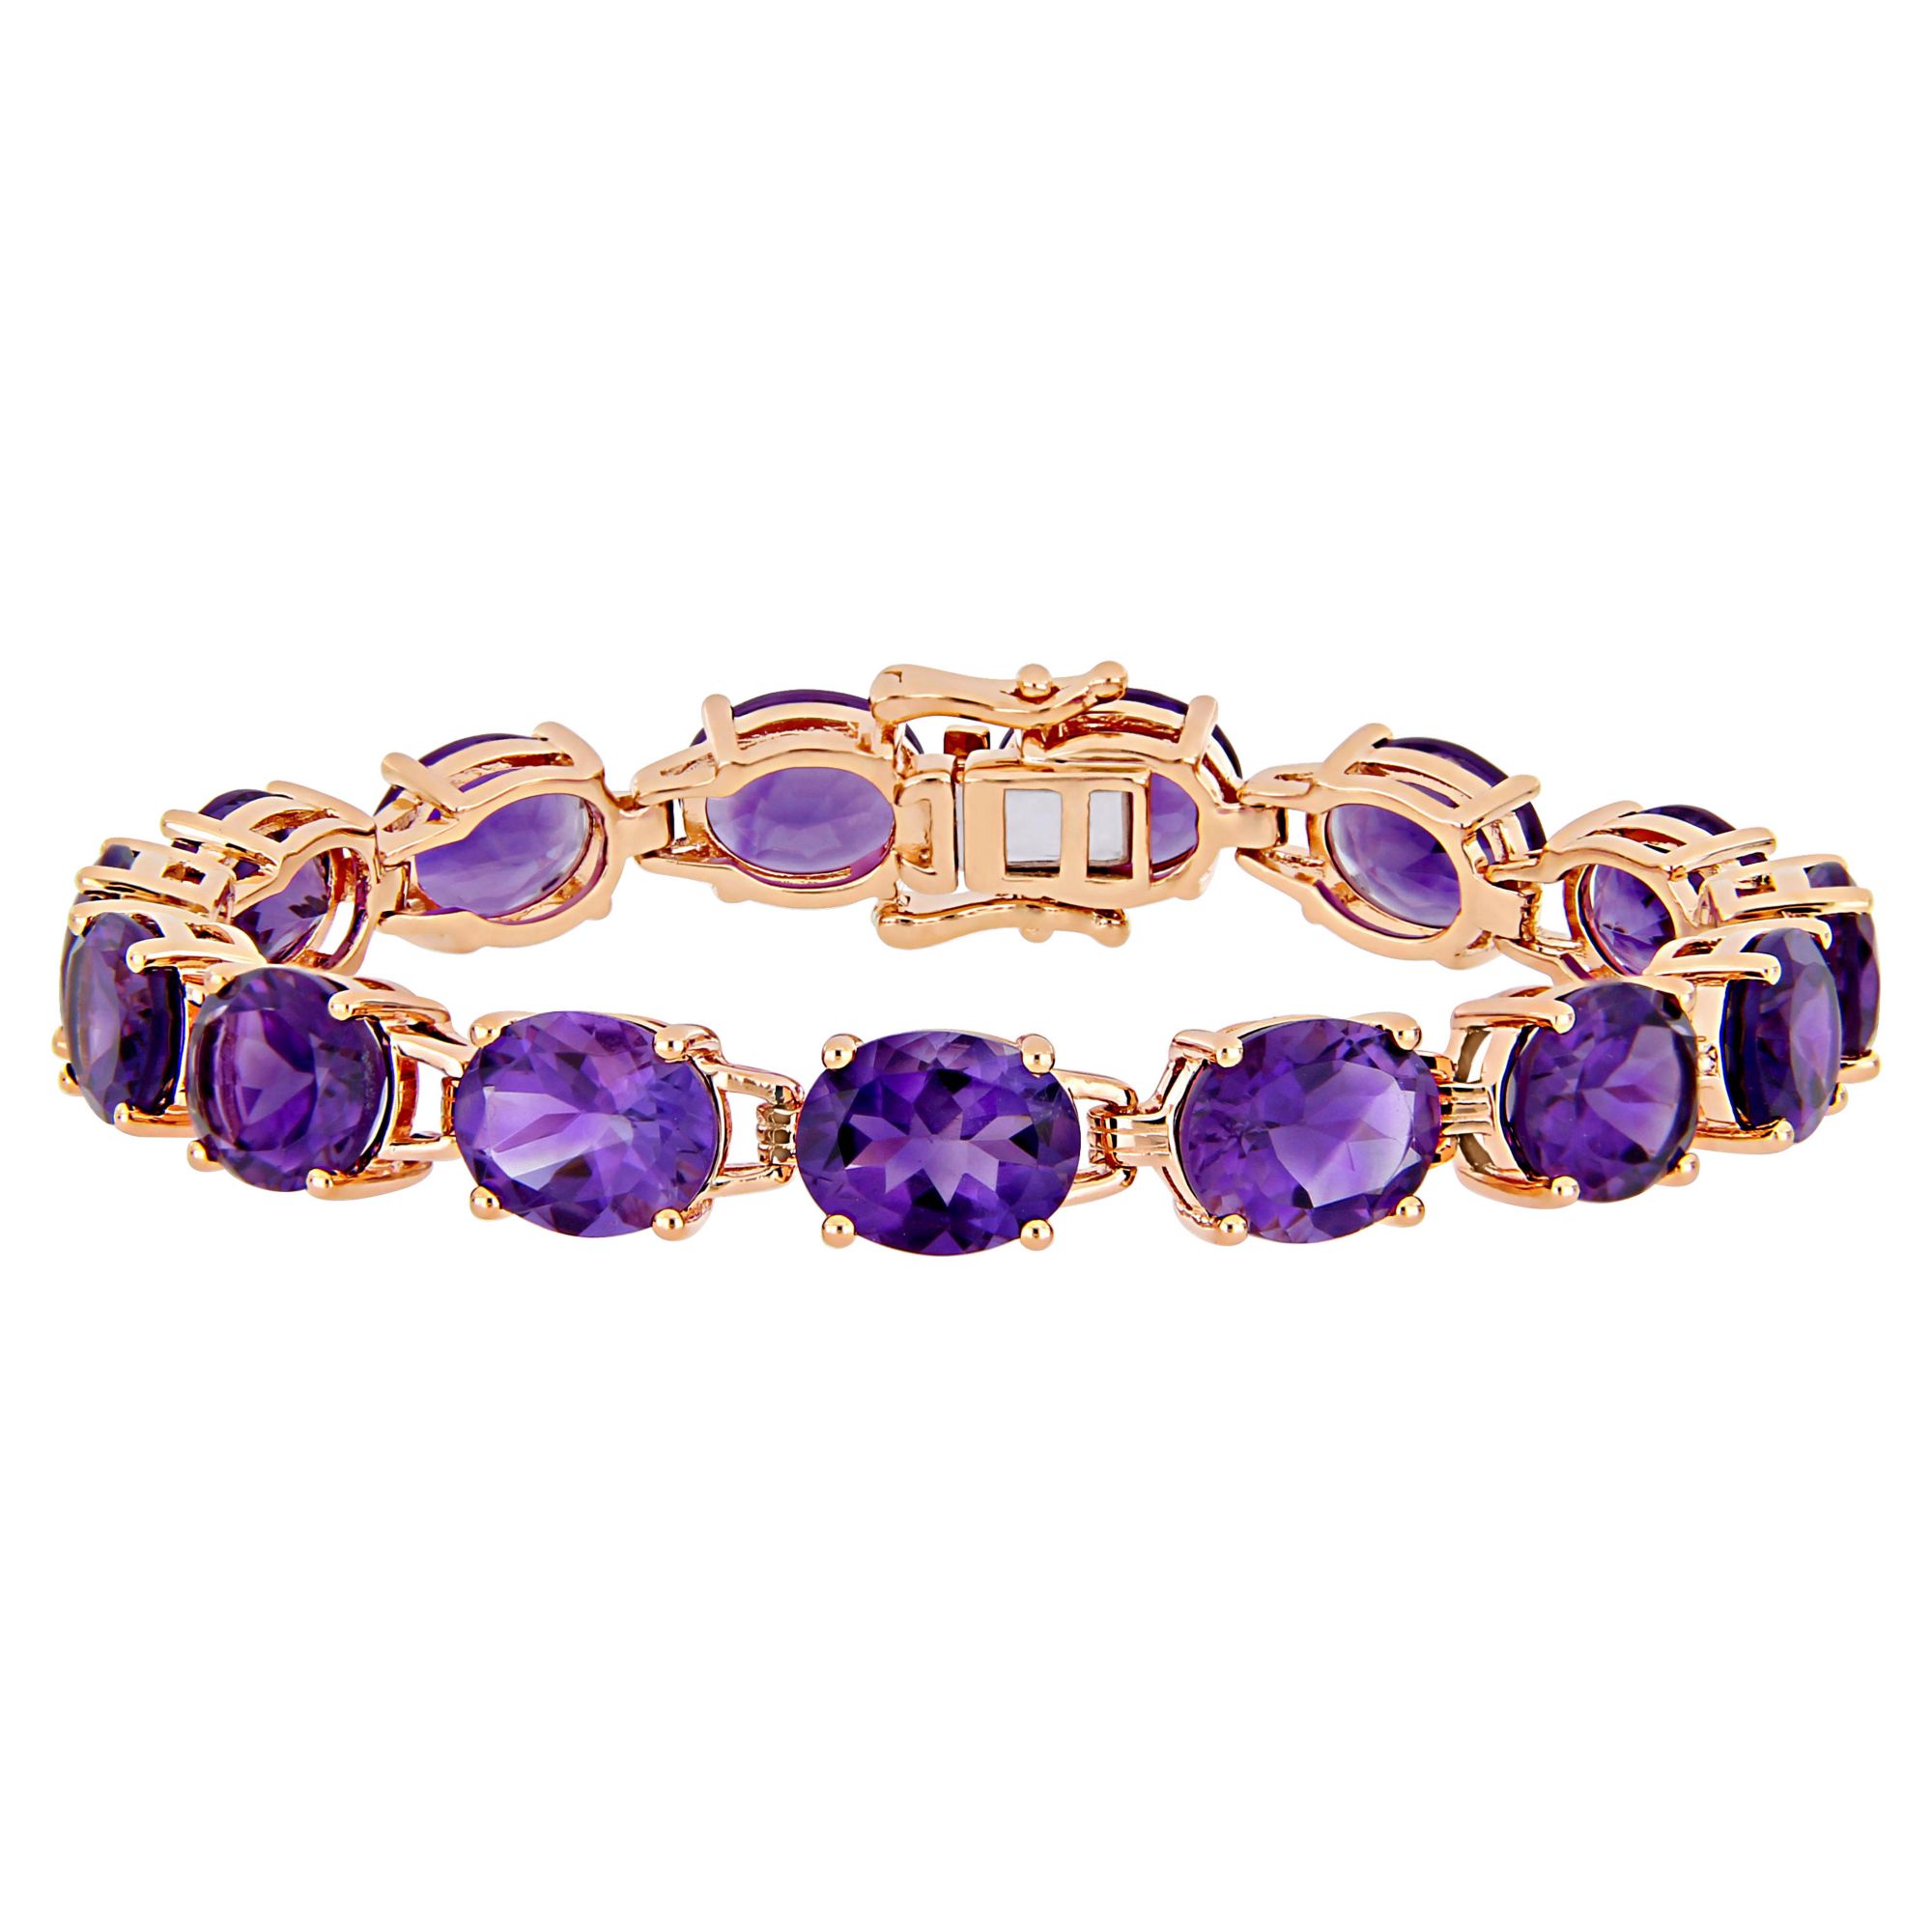 36 ct. t.g.w. Oval-Cut Africa-Amethyst Tennis Bracelet in Rose Gold Plated Sterling Silver